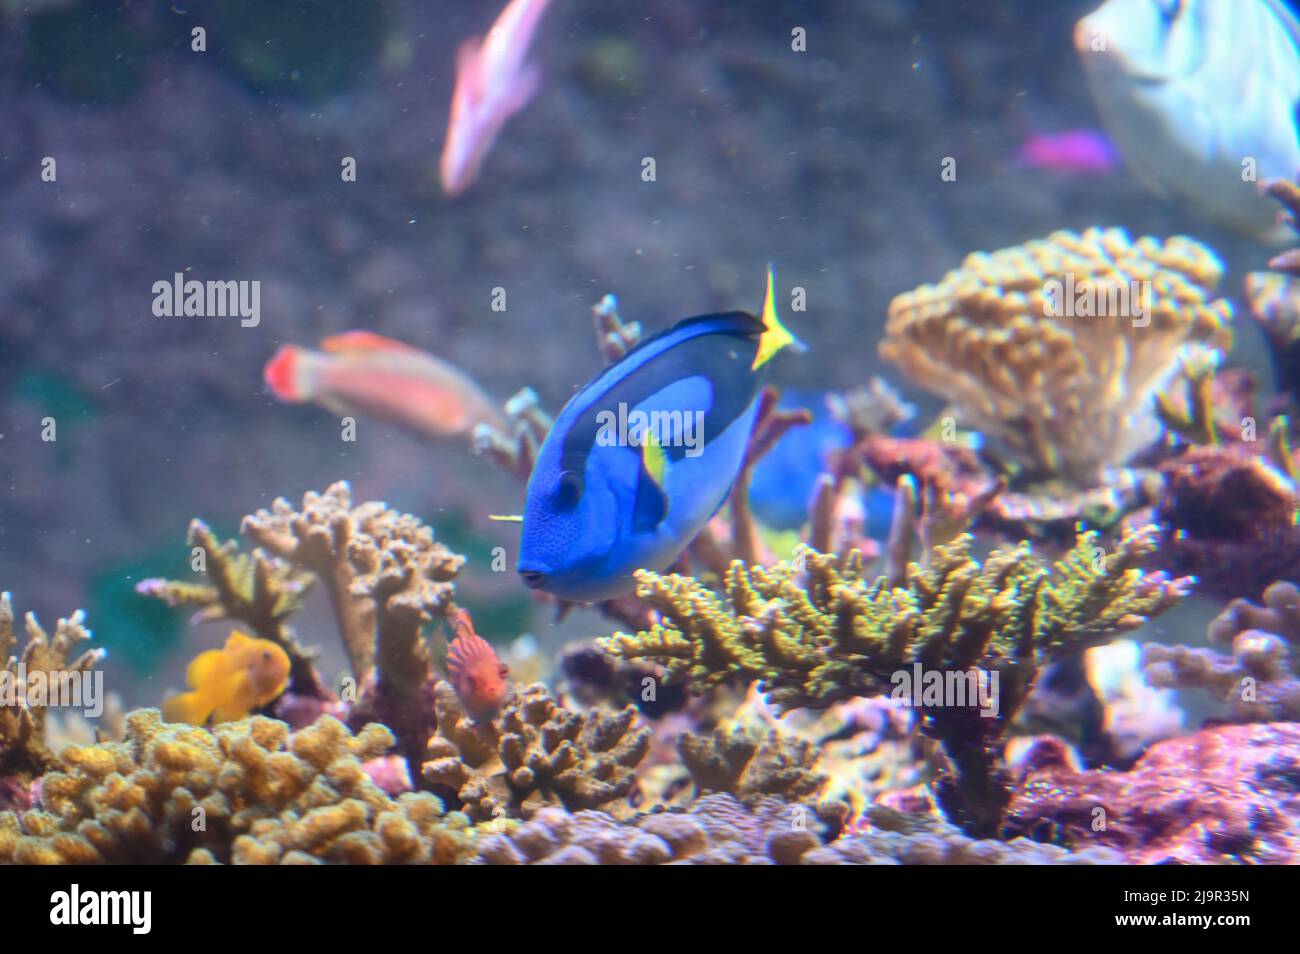 Blue tang fish also known as Paracanthurus hepatus is a species of Indo-Pacific surgeonfish, swimming in fish tank aquarium Stock Photo